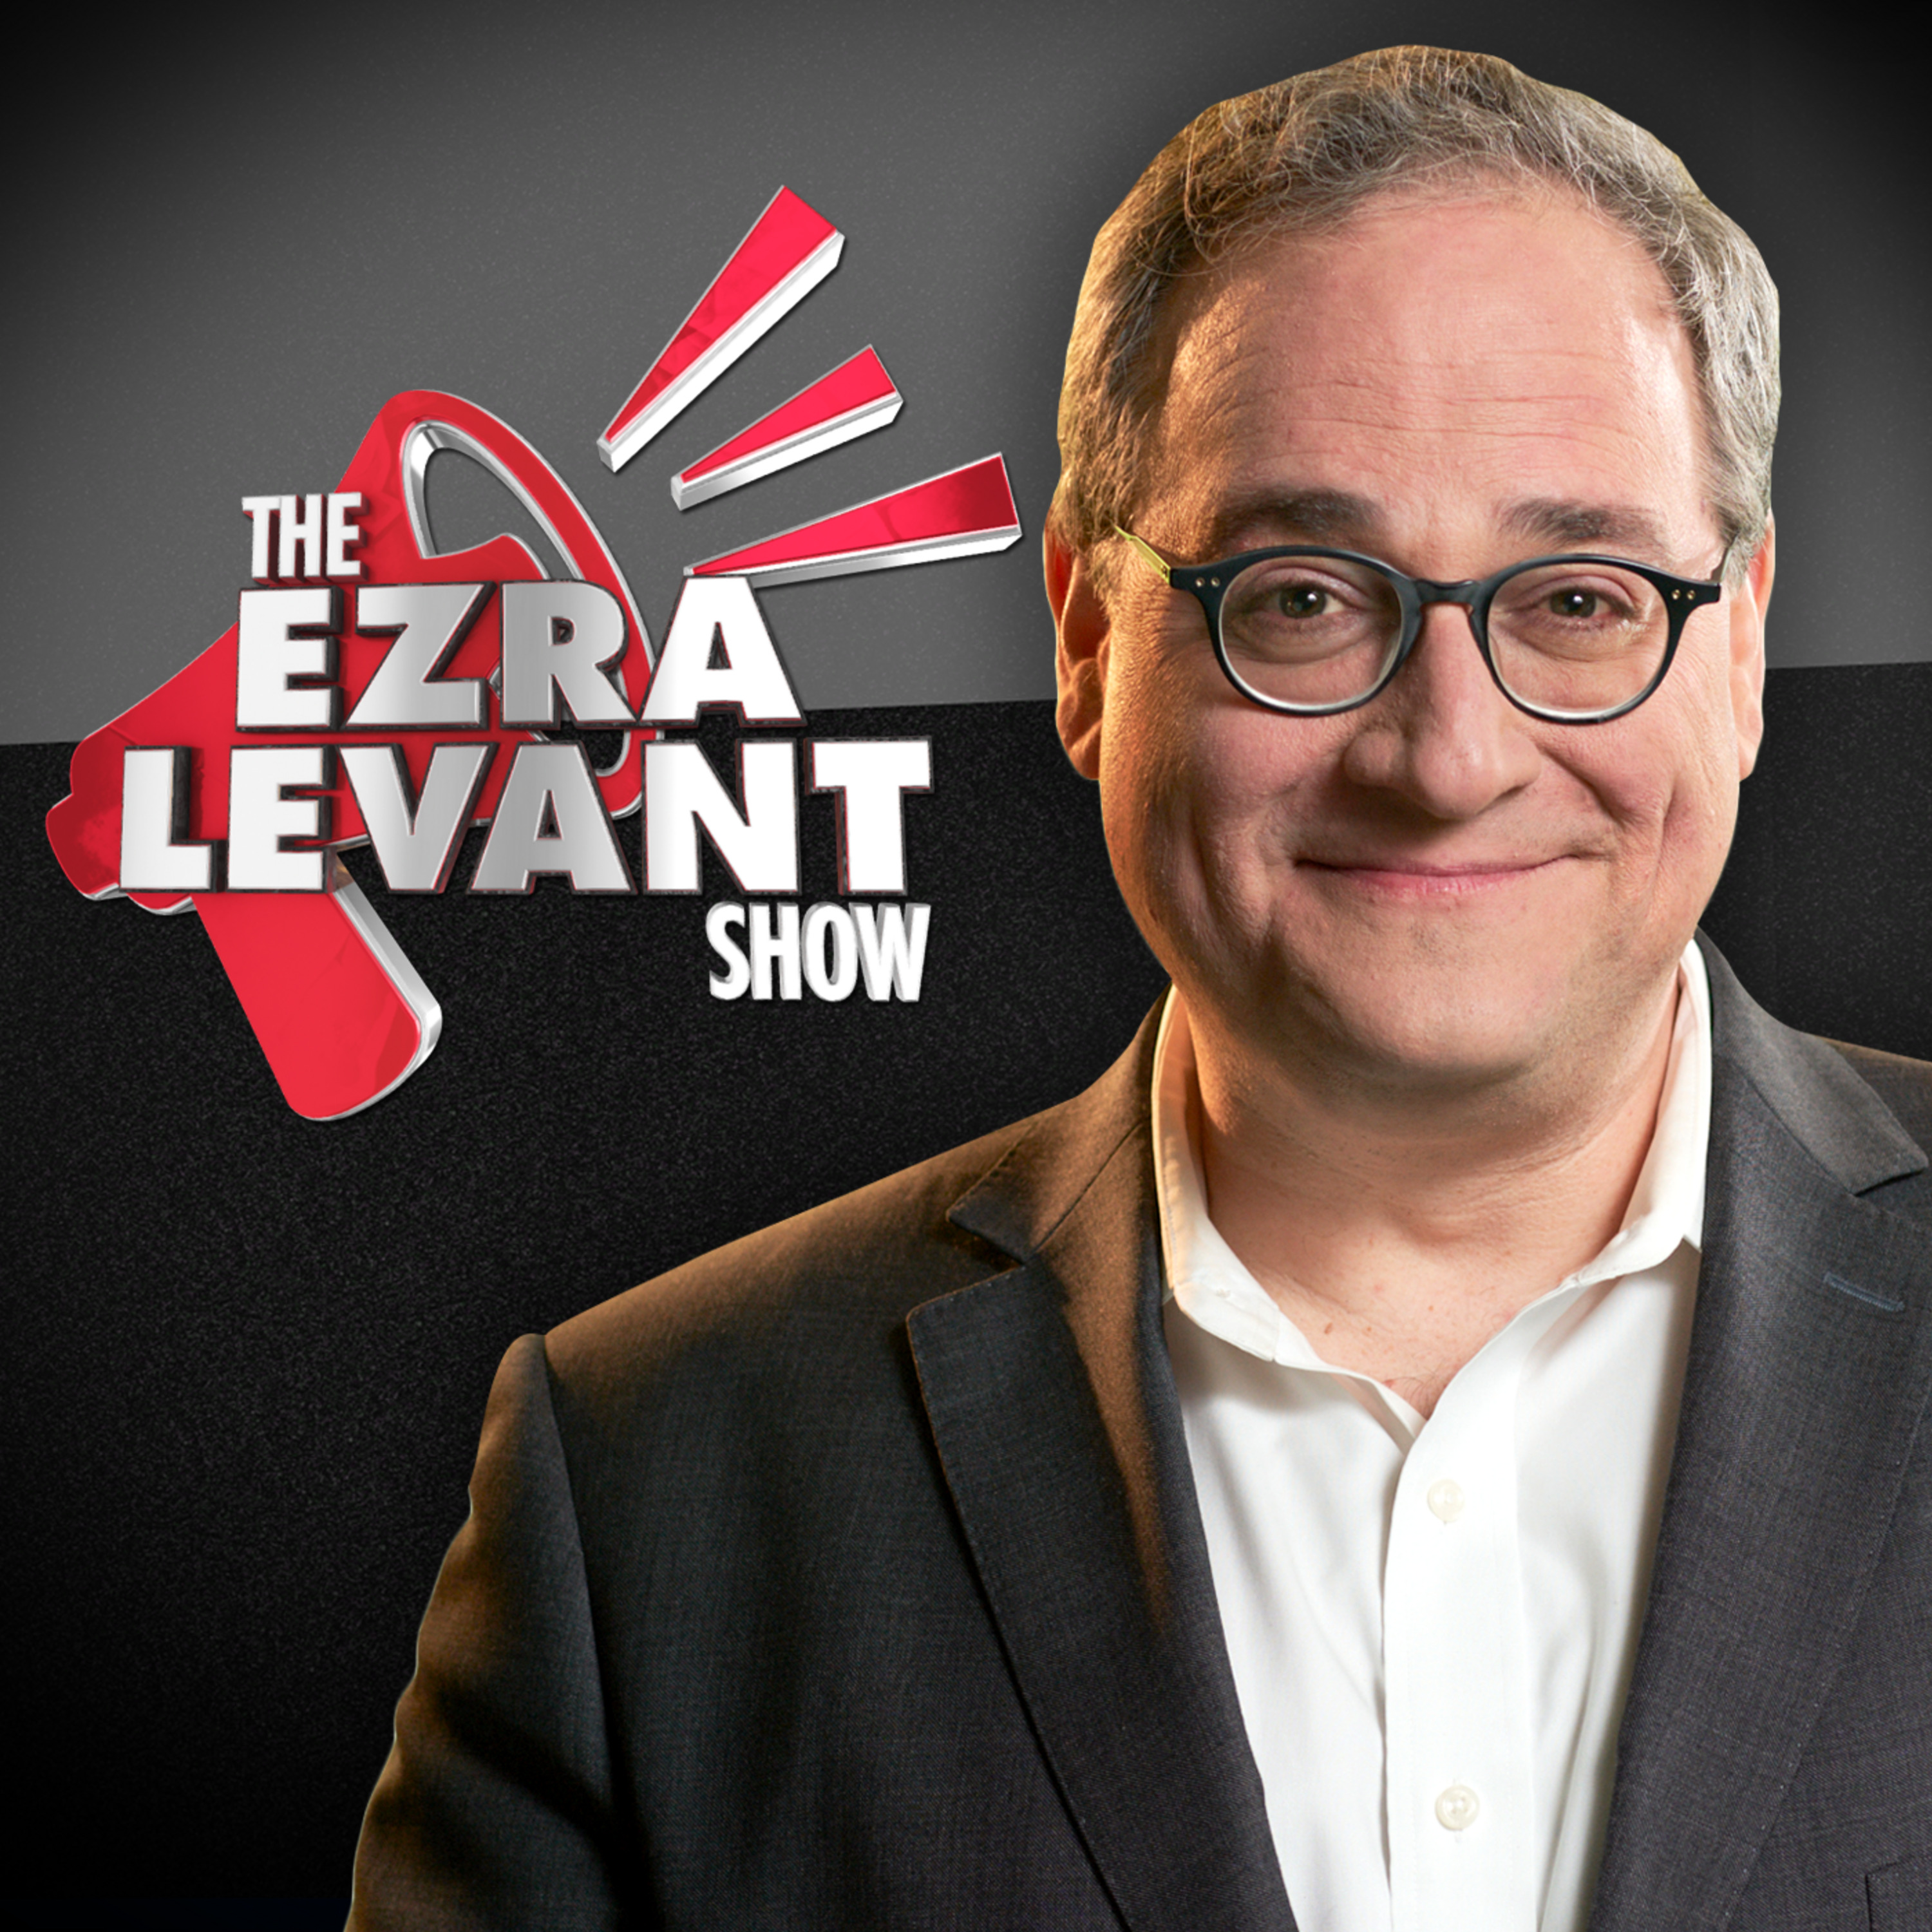 EZRA LEVANT | Pfizer's in trouble again, and we've got the video to prove it